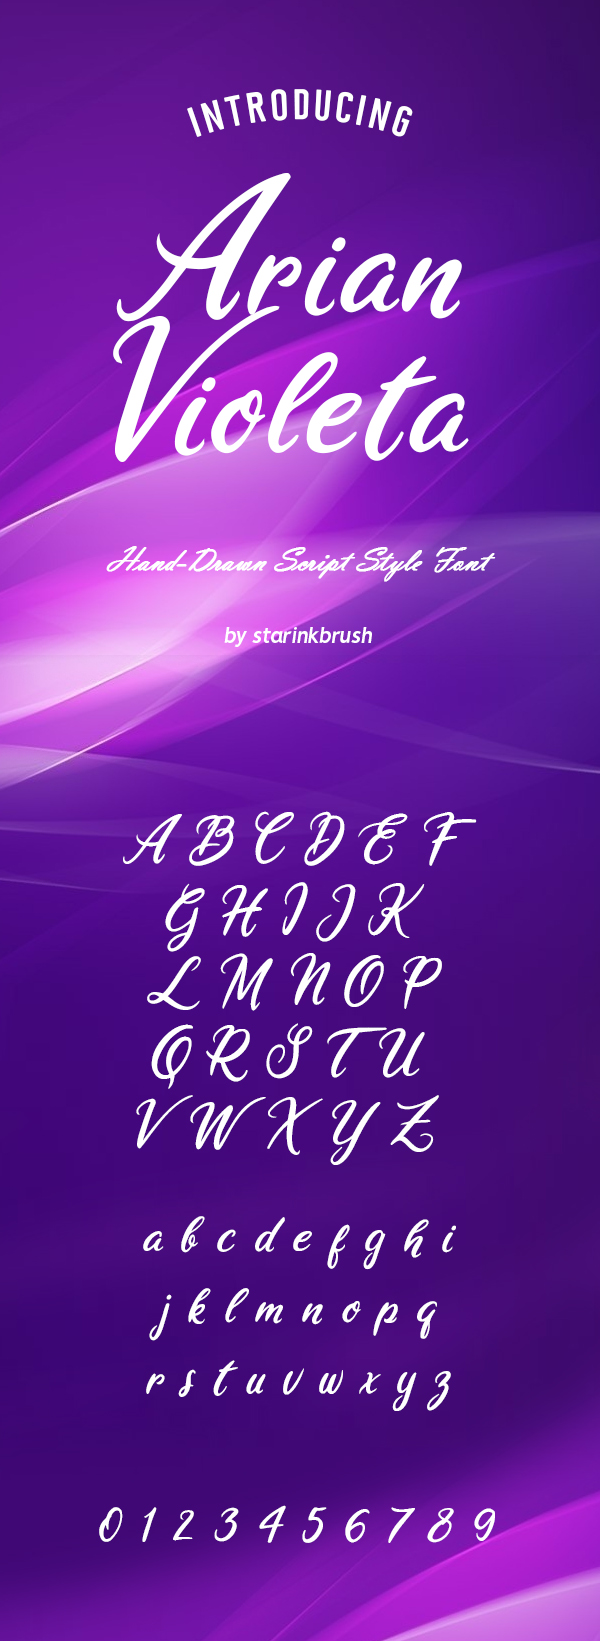 100 Greatest Free Fonts for 2020 - 28